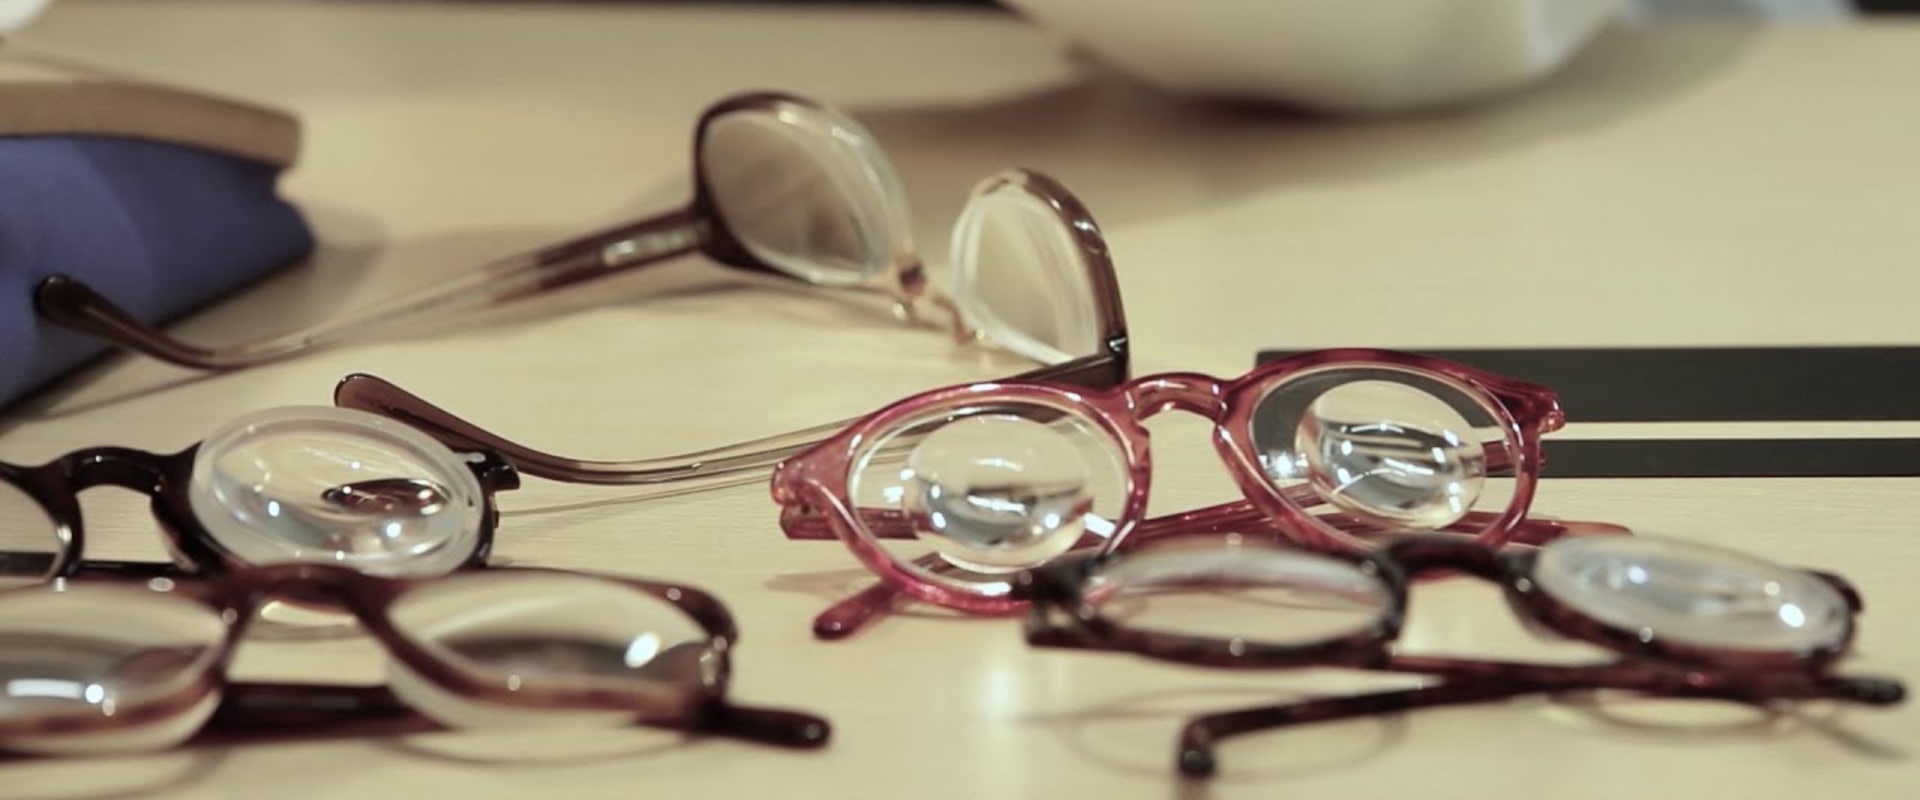 Maximizing Vision with Low Vision Aids: How an Optometrist Can Help